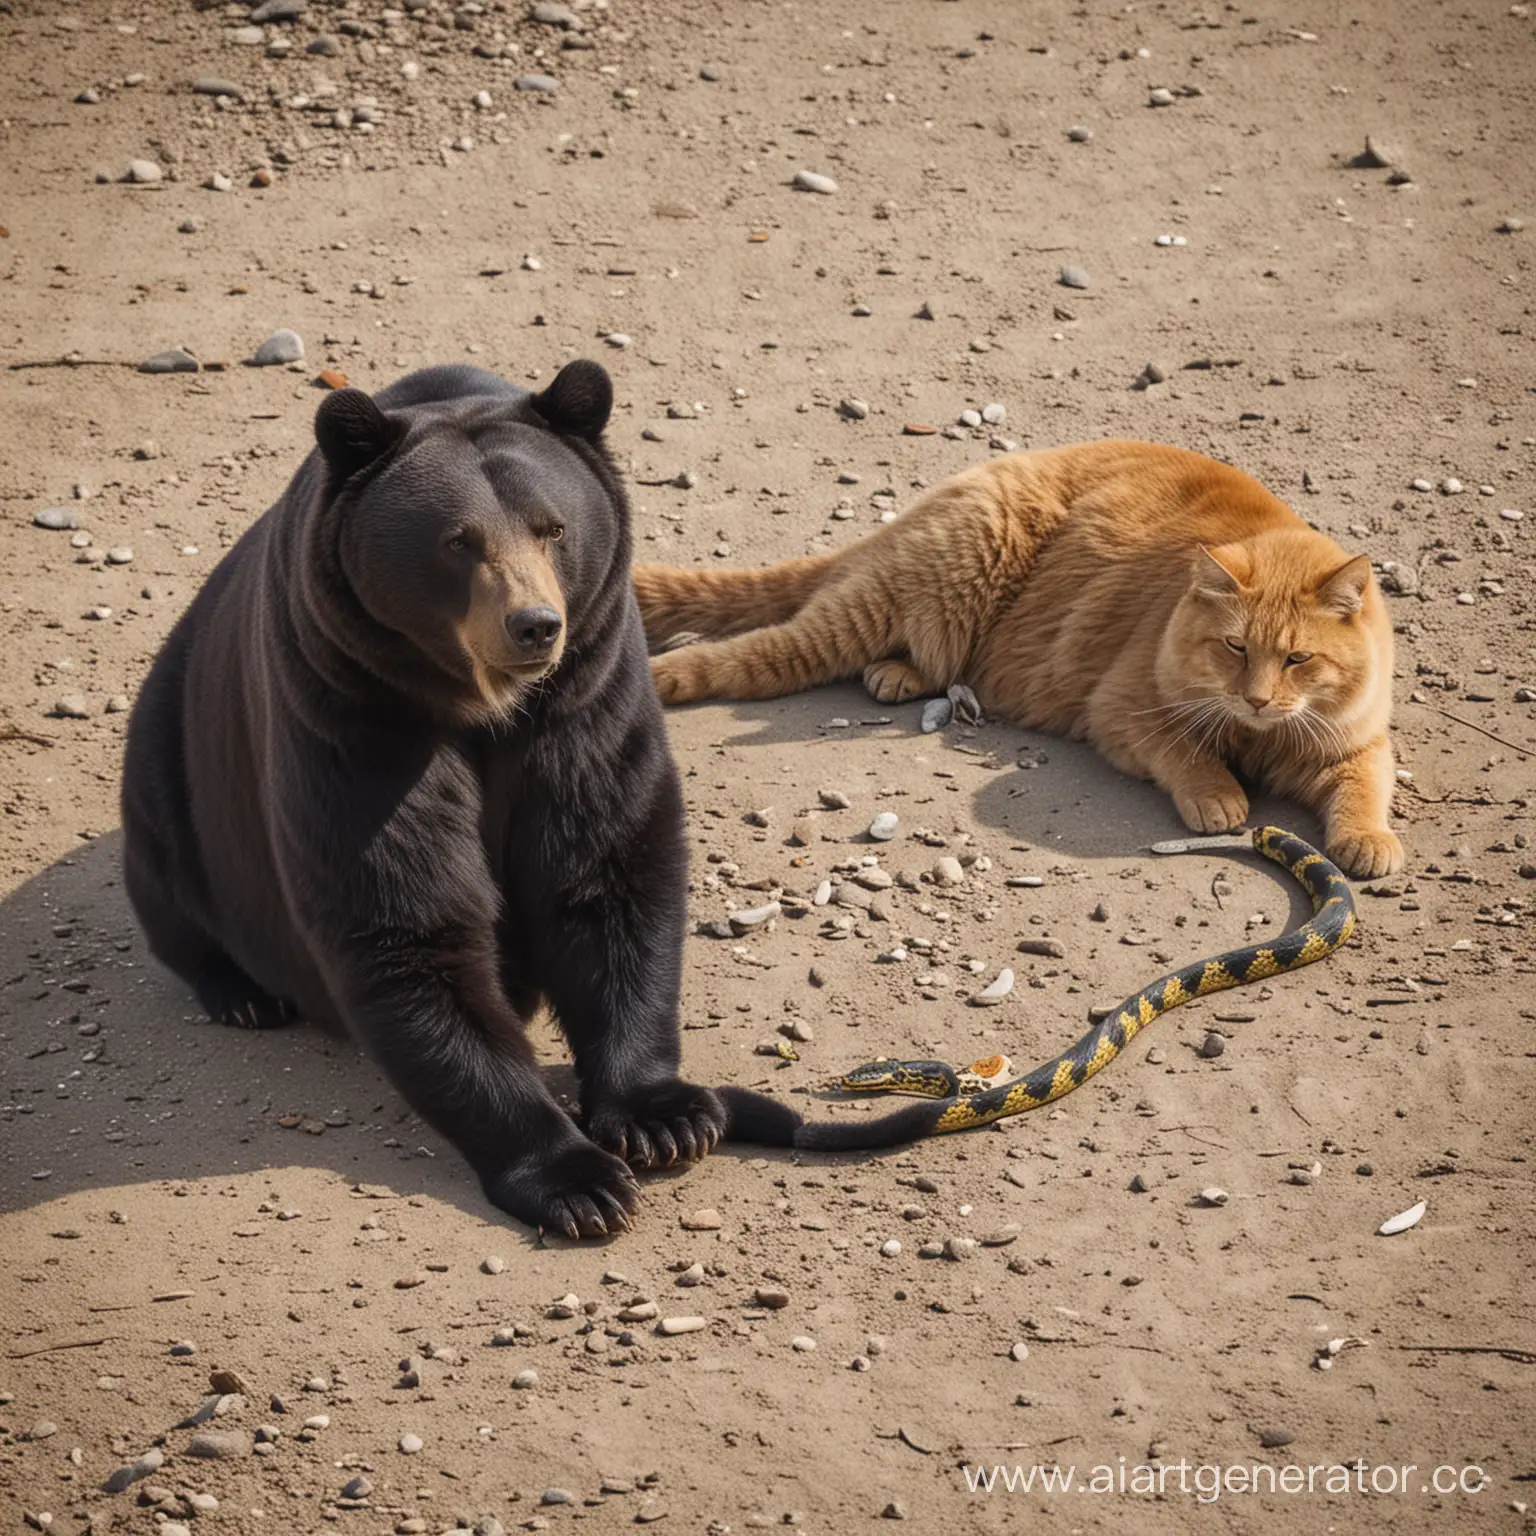 One bear, one cat , one snake